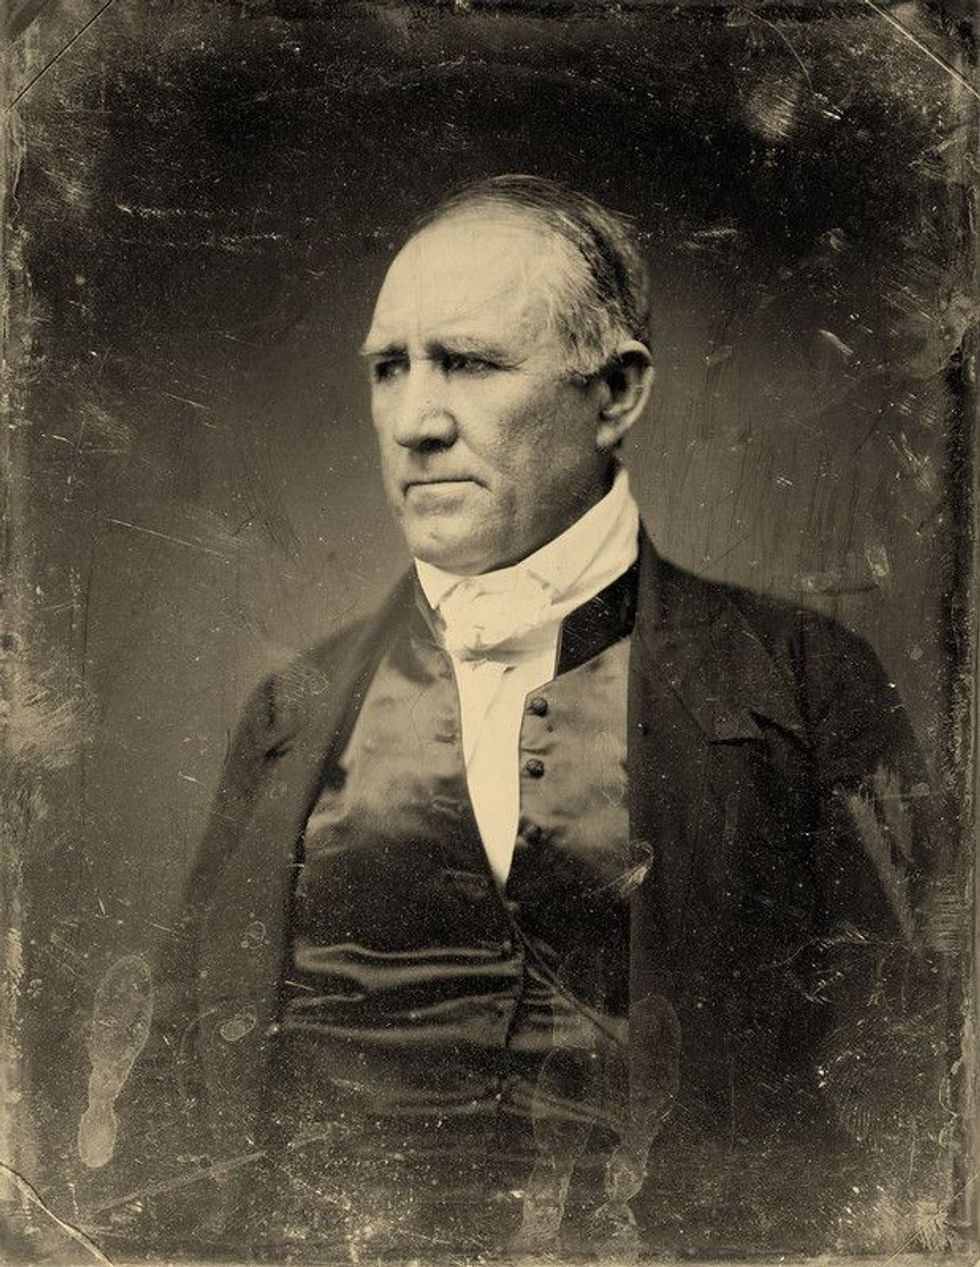 Find 31 Sam Houston quotes about war, independence, and leadership derived from his interviews and speeches.